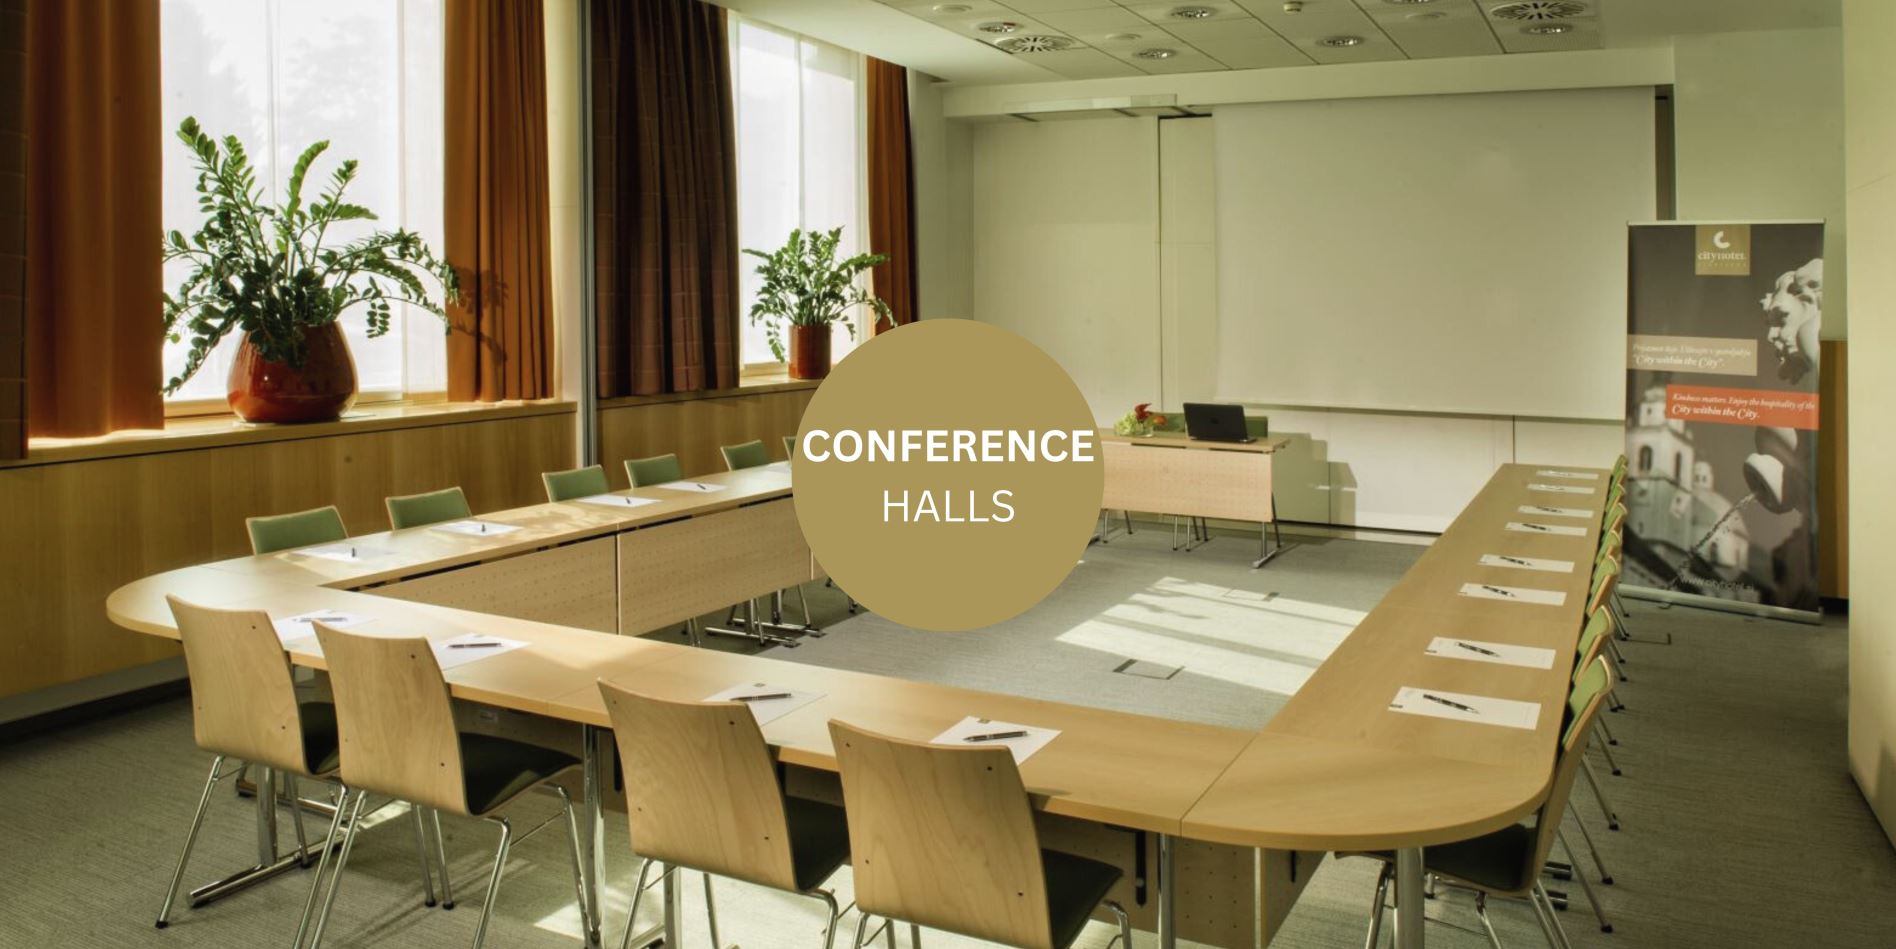 Regardless of the event size, our friendly staff and bright, fully equipped conference rooms will make sure each event is truly special. 